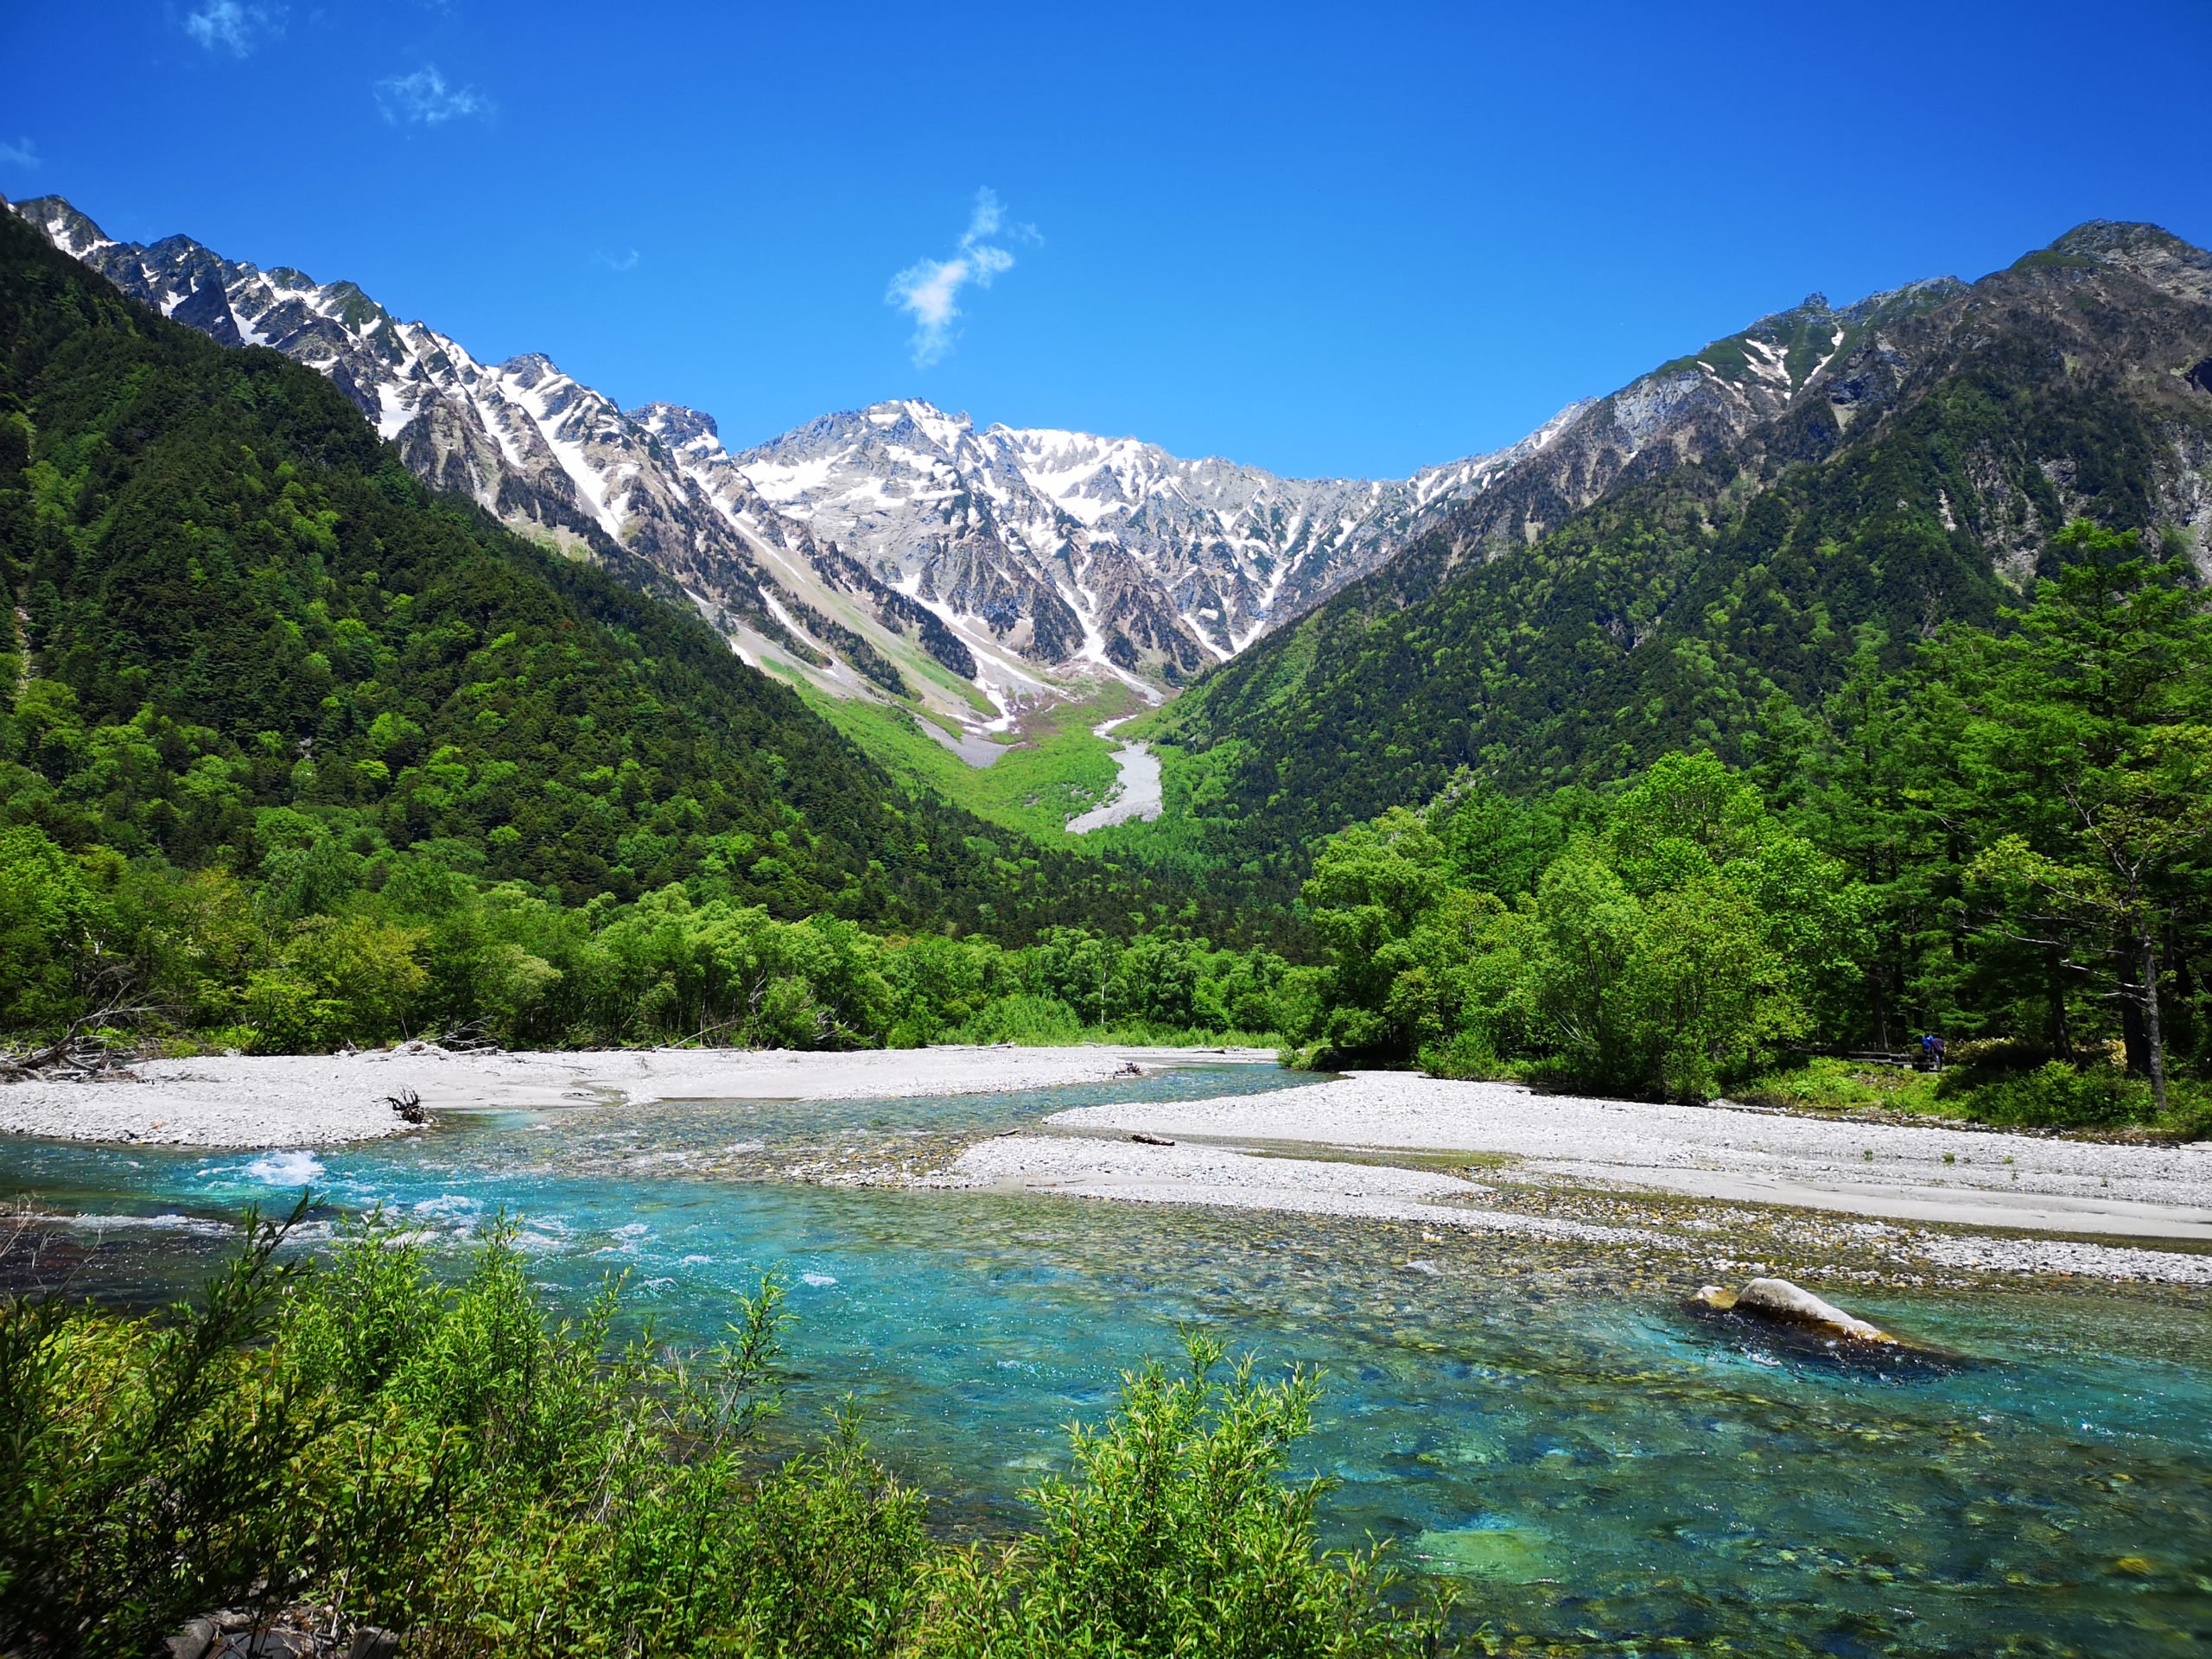 Discover The Japanese Alps On The Kamikochi Hiking Tour From Hirayu Onsen